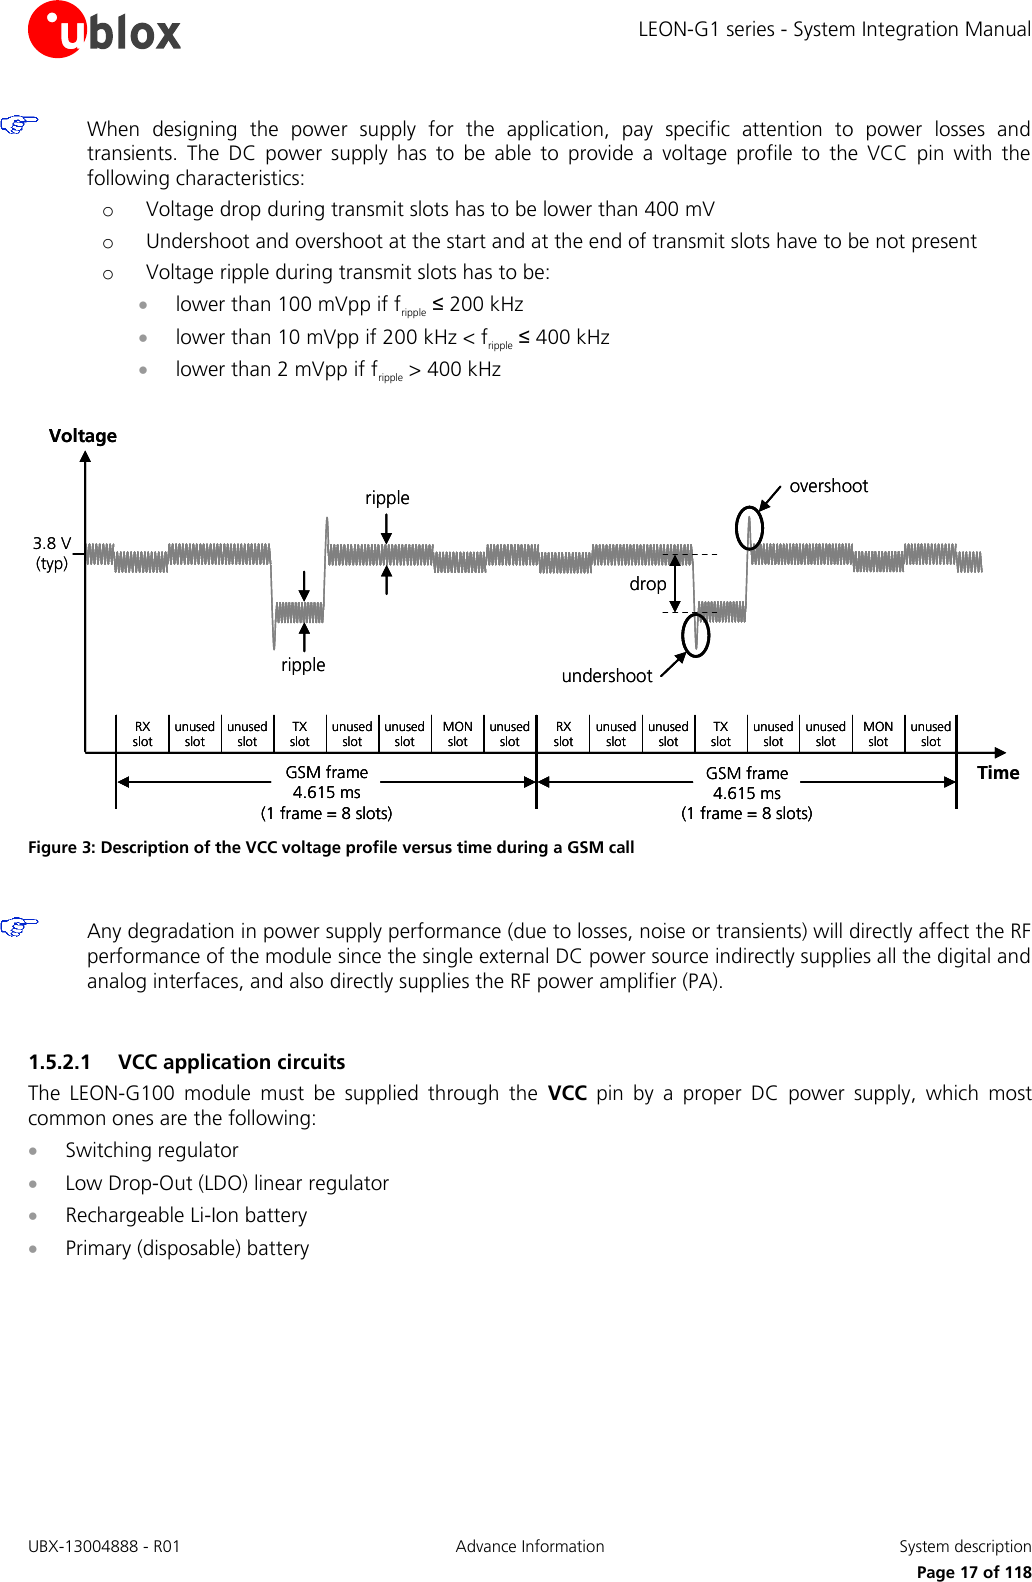 LEON-G1 series - System Integration Manual UBX-13004888 - R01  Advance Information  System description      Page 17 of 118  When  designing  the  power  supply  for  the  application,  pay  specific  attention  to  power  losses  and transients.  The  DC  power  supply  has  to  be  able  to  provide  a  voltage  profile  to  the  VCC  pin  with  the following characteristics: o Voltage drop during transmit slots has to be lower than 400 mV o Undershoot and overshoot at the start and at the end of transmit slots have to be not present o Voltage ripple during transmit slots has to be:  lower than 100 mVpp if fripple ≤ 200 kHz  lower than 10 mVpp if 200 kHz &lt; fripple ≤ 400 kHz  lower than 2 mVpp if fripple &gt; 400 kHz   Figure 3: Description of the VCC voltage profile versus time during a GSM call   Any degradation in power supply performance (due to losses, noise or transients) will directly affect the RF performance of the module since the single external DC power source indirectly supplies all the digital and analog interfaces, and also directly supplies the RF power amplifier (PA).  1.5.2.1 VCC application circuits The  LEON-G100  module  must  be  supplied  through  the  VCC  pin  by  a  proper  DC  power  supply,  which  most common ones are the following:  Switching regulator  Low Drop-Out (LDO) linear regulator  Rechargeable Li-Ion battery  Primary (disposable) battery  TimeundershootovershootripplerippledropVoltage3.8 V (typ)RX     slotunused slotunused slotTX     slotunused slotunused slotMON       slotunused slotRX     slotunused slotunused slotTX     slotunused slotunused slotMON   slotunused slotGSM frame             4.615 ms                                       (1 frame = 8 slots)GSM frame             4.615 ms                                       (1 frame = 8 slots)TimeundershootovershootripplerippledropVoltage3.8 V (typ)RX     slotunused slotunused slotTX     slotunused slotunused slotMON       slotunused slotRX     slotunused slotunused slotTX     slotunused slotunused slotMON   slotunused slotGSM frame             4.615 ms                                       (1 frame = 8 slots)GSM frame             4.615 ms                                       (1 frame = 8 slots)RX     slotunused slotunused slotTX     slotunused slotunused slotMON       slotunused slotRX     slotunused slotunused slotTX     slotunused slotunused slotMON   slotunused slotGSM frame             4.615 ms                                       (1 frame = 8 slots)GSM frame             4.615 ms                                       (1 frame = 8 slots)